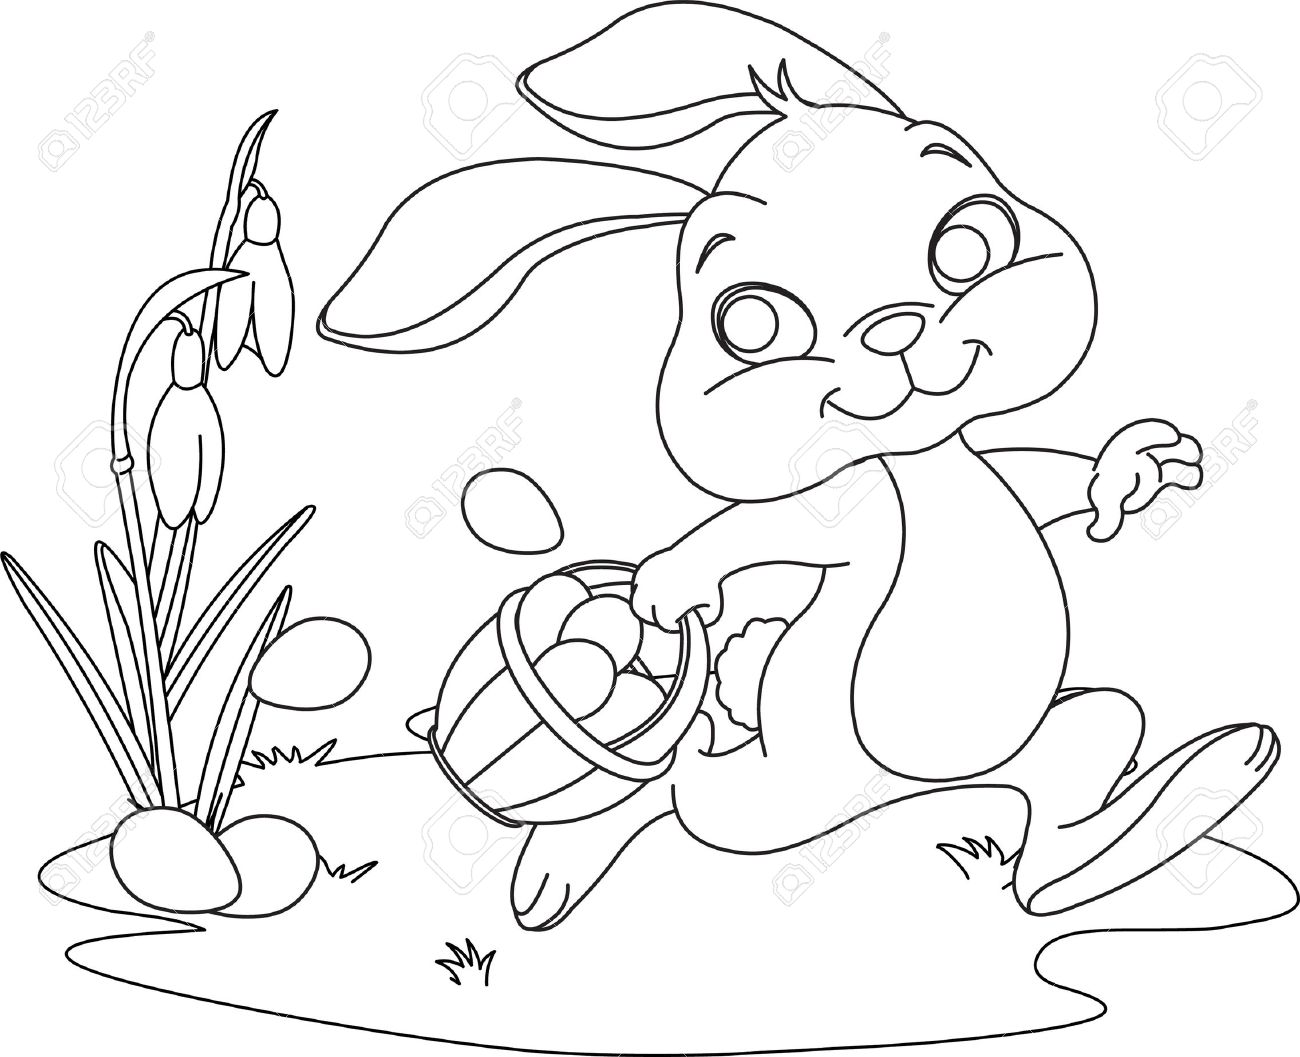 easter-bunny-ears-coloring-pages-download-and-print-for-free